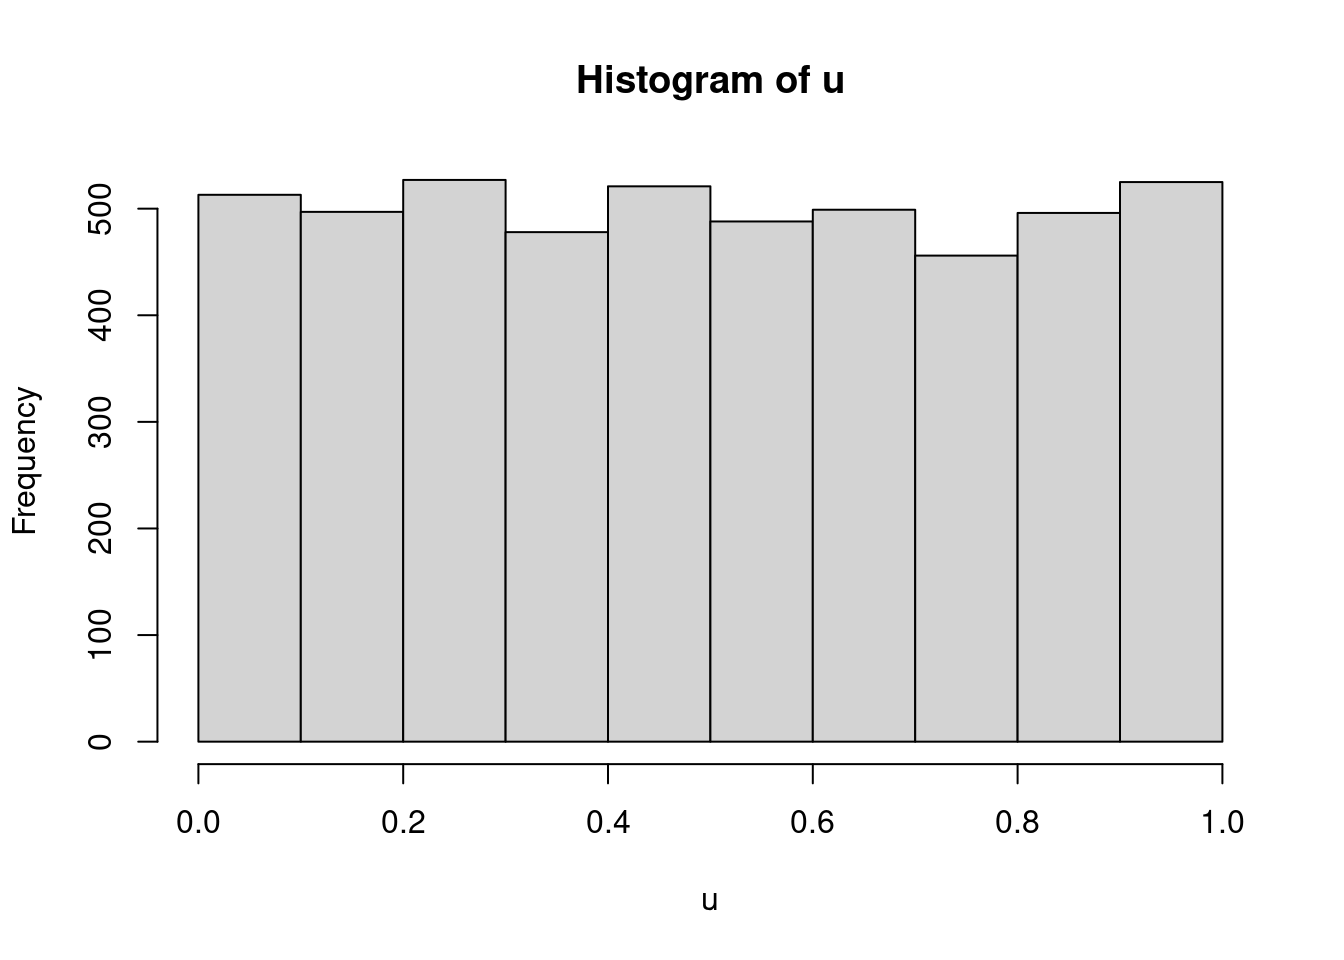 Histogram of a sequence of uniform numbers